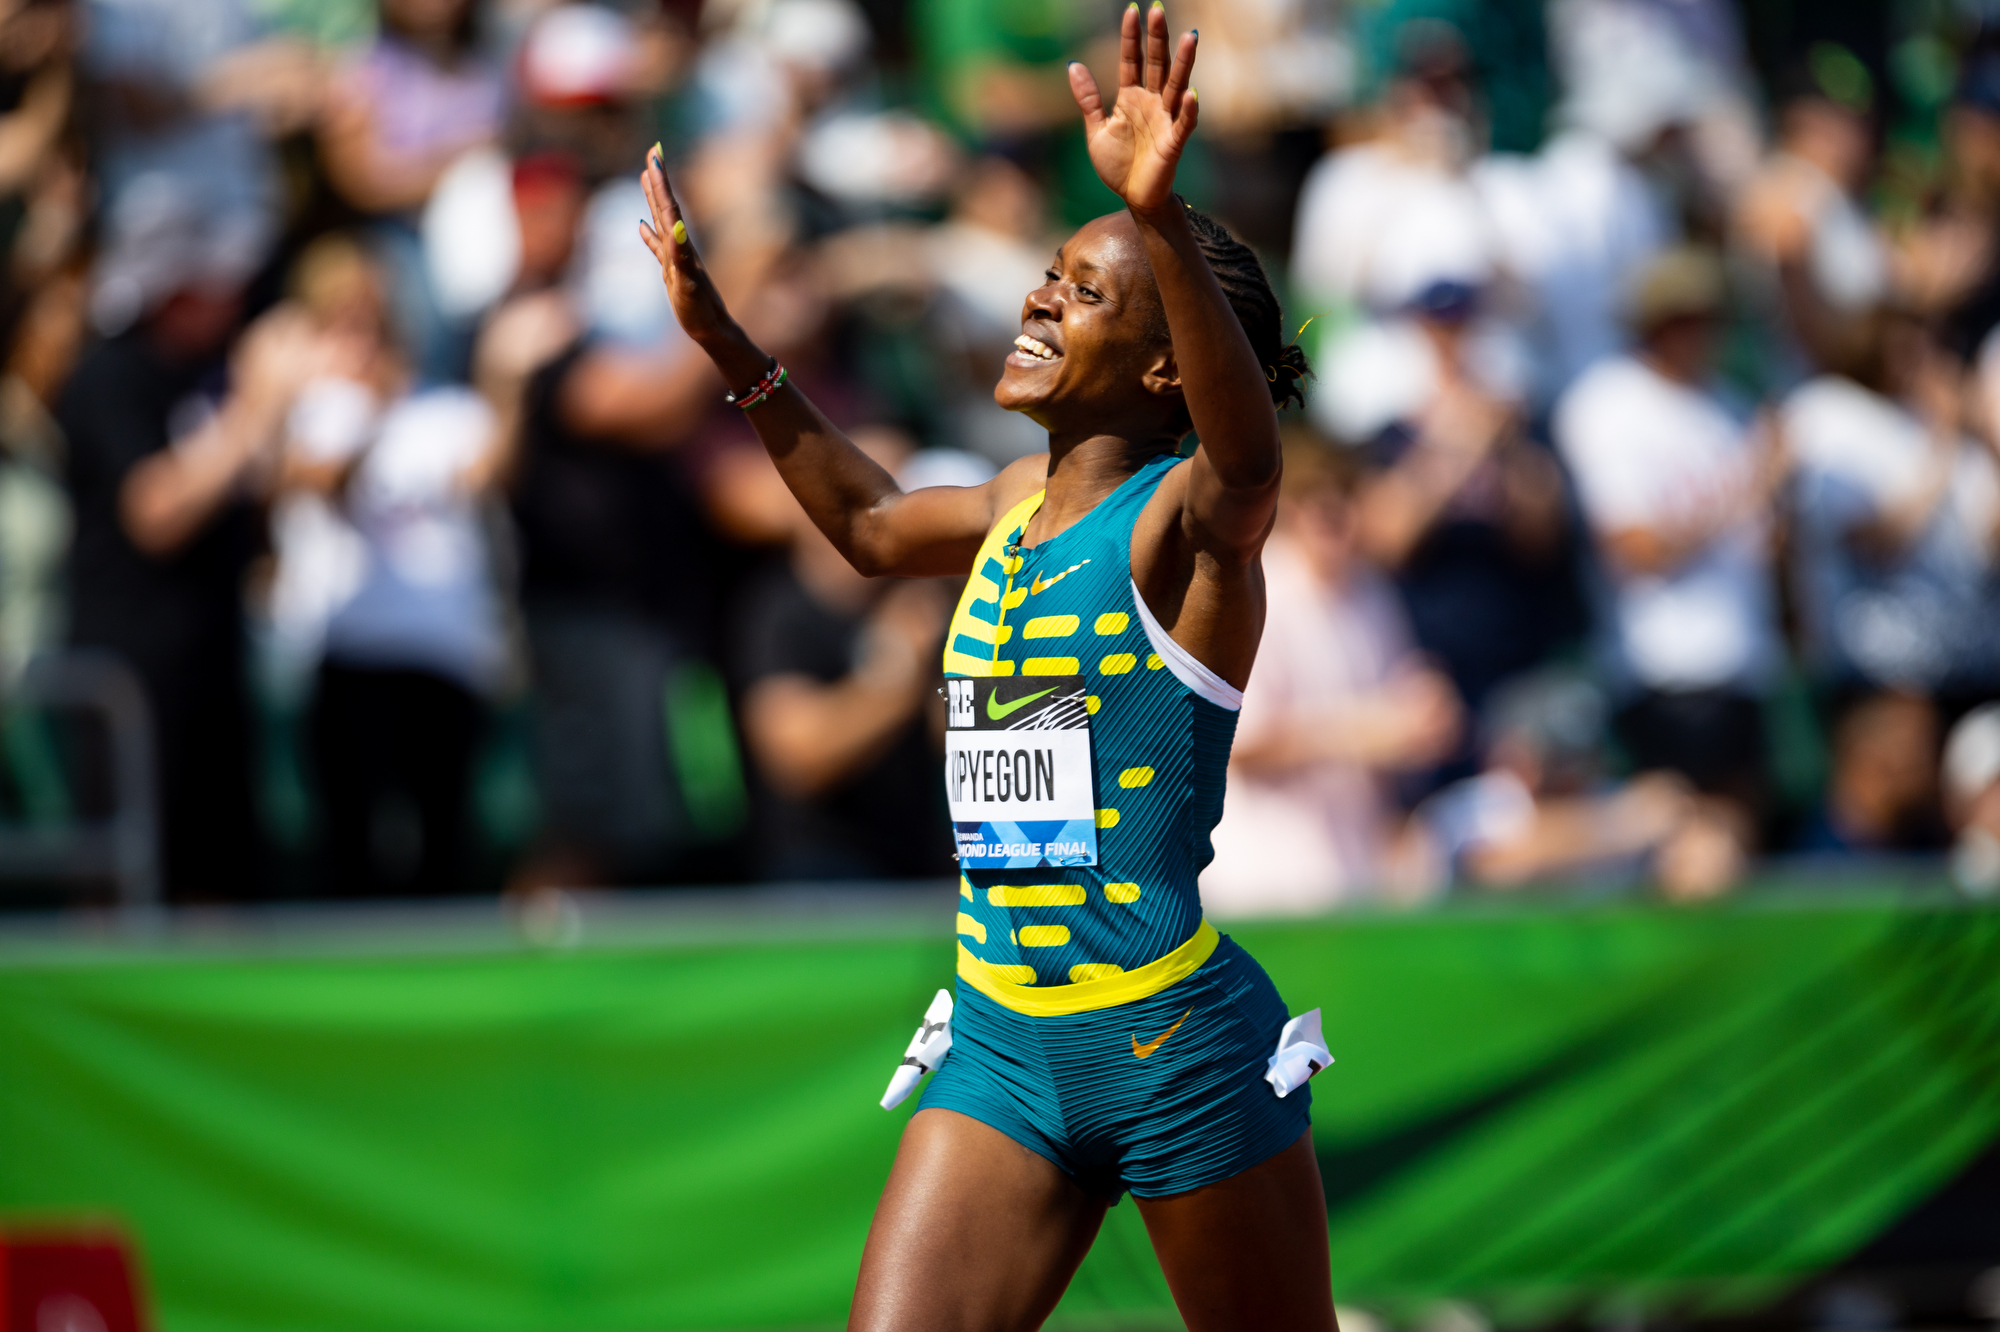 Faith Kipyegon of Kenya celebrates as she wins the women’s 1,500 meters at the Prefontaine Classic track and field meet on Saturday, Sept. 16, 2023, at Hayward Field in Eugene.